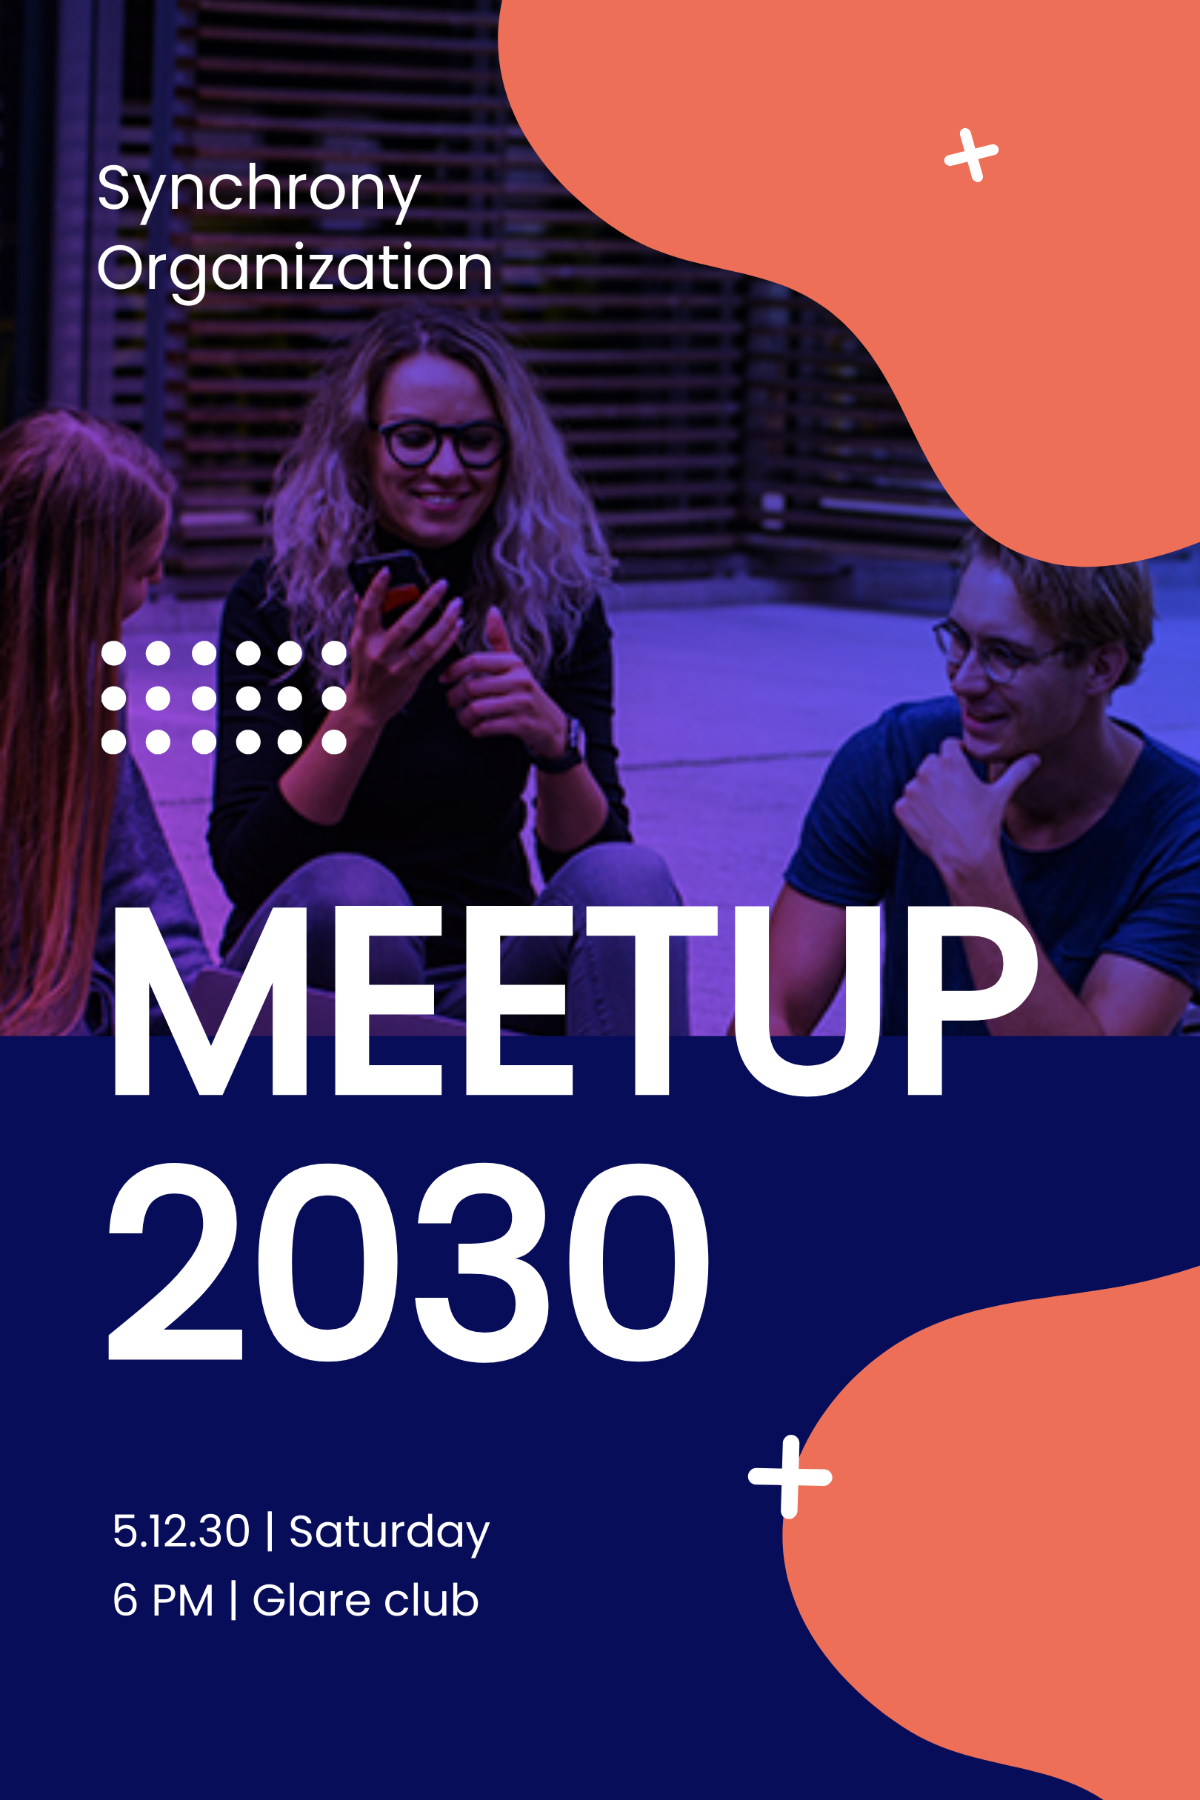 Meetup Event Tumblr Post Template